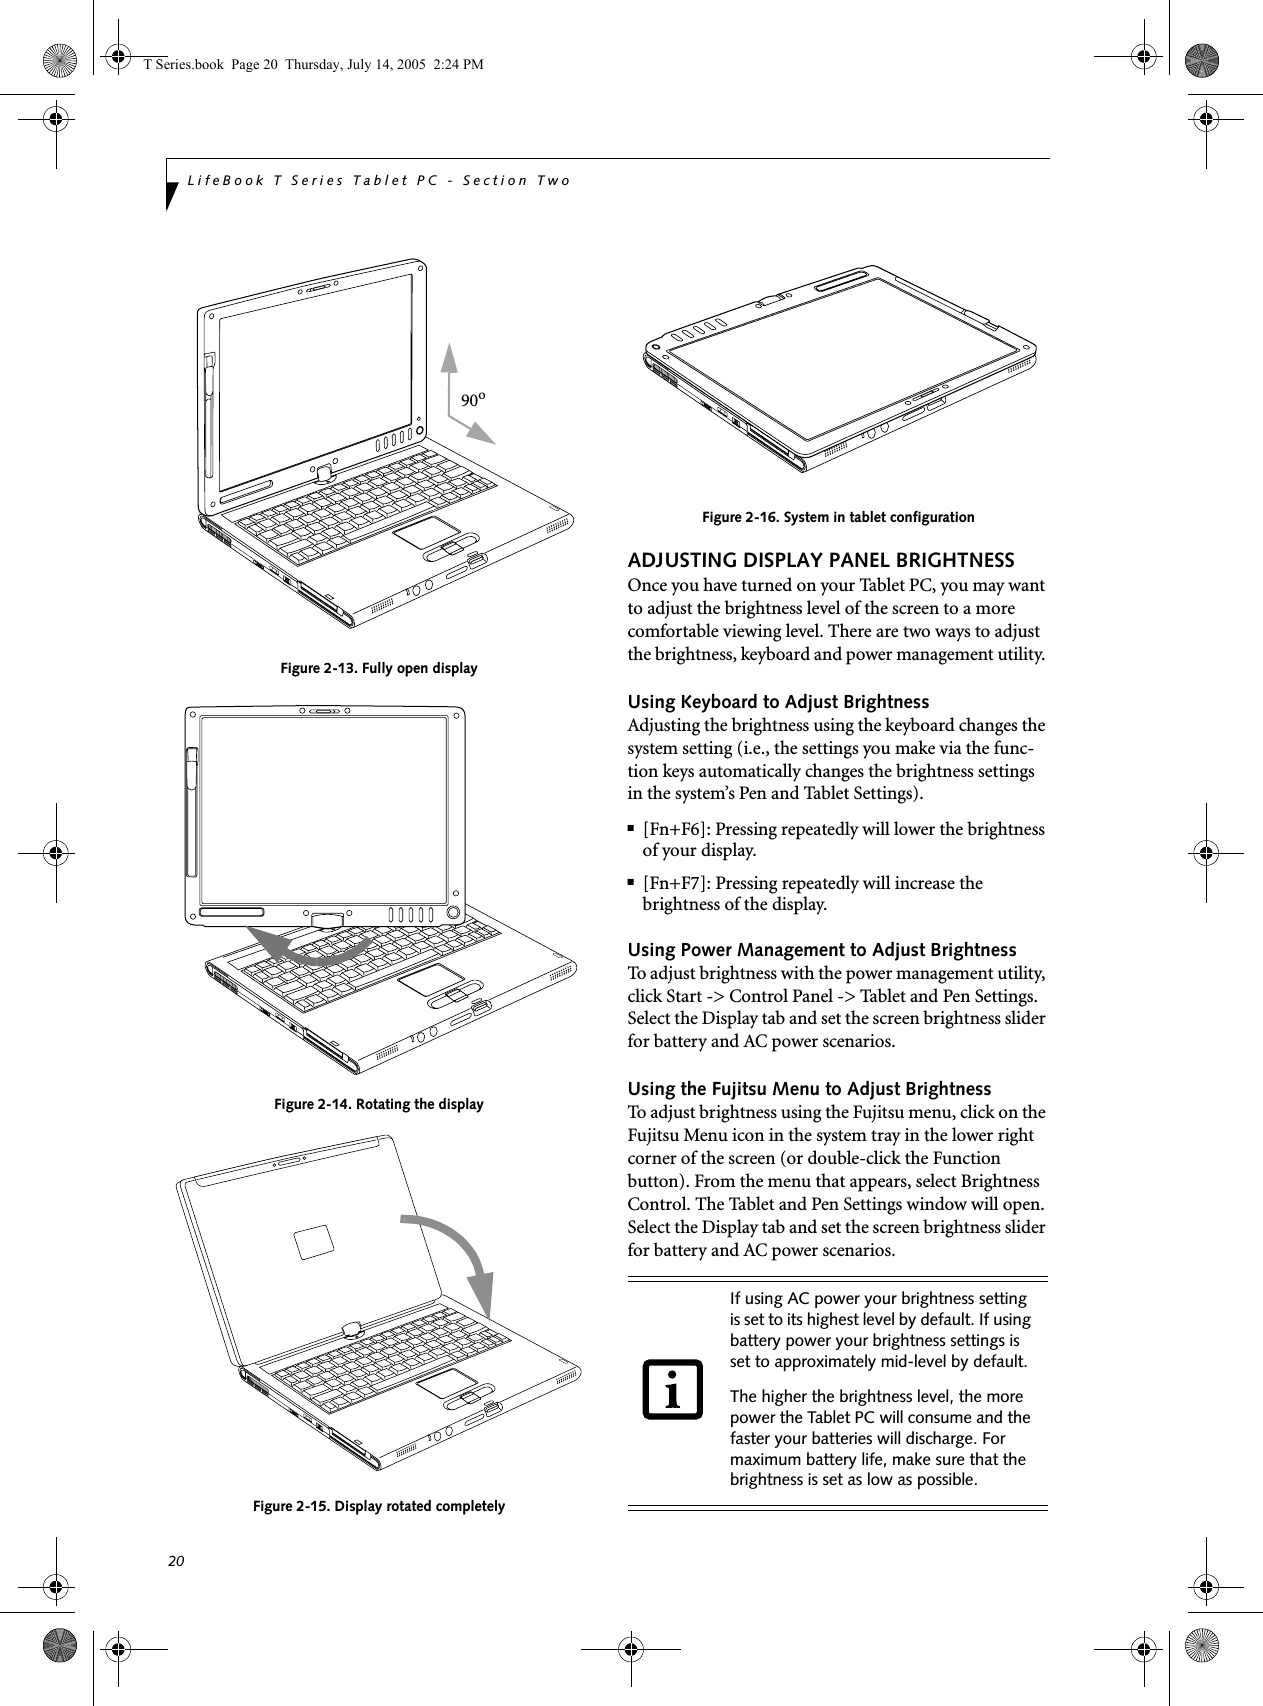 20LifeBook T Series Tablet PC - Section TwoFigure 2-13. Fully open displayFigure 2-14. Rotating the displayFigure 2-15. Display rotated completelyFigure 2-16. System in tablet configurationADJUSTING DISPLAY PANEL BRIGHTNESSOnce you have turned on your Tablet PC, you may want to adjust the brightness level of the screen to a more comfortable viewing level. There are two ways to adjust the brightness, keyboard and power management utility. Using Keyboard to Adjust BrightnessAdjusting the brightness using the keyboard changes the system setting (i.e., the settings you make via the func-tion keys automatically changes the brightness settings in the system’s Pen and Tablet Settings). ■[Fn+F6]: Pressing repeatedly will lower the brightness of your display.■[Fn+F7]: Pressing repeatedly will increase thebrightness of the display.Using Power Management to Adjust BrightnessTo adjust brightness with the power management utility, click Start -&gt; Control Panel -&gt; Tablet and Pen Settings. Select the Display tab and set the screen brightness slider for battery and AC power scenarios.Using the Fujitsu Menu to Adjust BrightnessTo adjust brightness using the Fujitsu menu, click on the Fujitsu Menu icon in the system tray in the lower right corner of the screen (or double-click the Function button). From the menu that appears, select Brightness Control. The Tablet and Pen Settings window will open. Select the Display tab and set the screen brightness slider for battery and AC power scenarios. 90oIf using AC power your brightness setting is set to its highest level by default. If using battery power your brightness settings is set to approximately mid-level by default.The higher the brightness level, the more power the Tablet PC will consume and the faster your batteries will discharge. For maximum battery life, make sure that the brightness is set as low as possible.T Series.book  Page 20  Thursday, July 14, 2005  2:24 PM